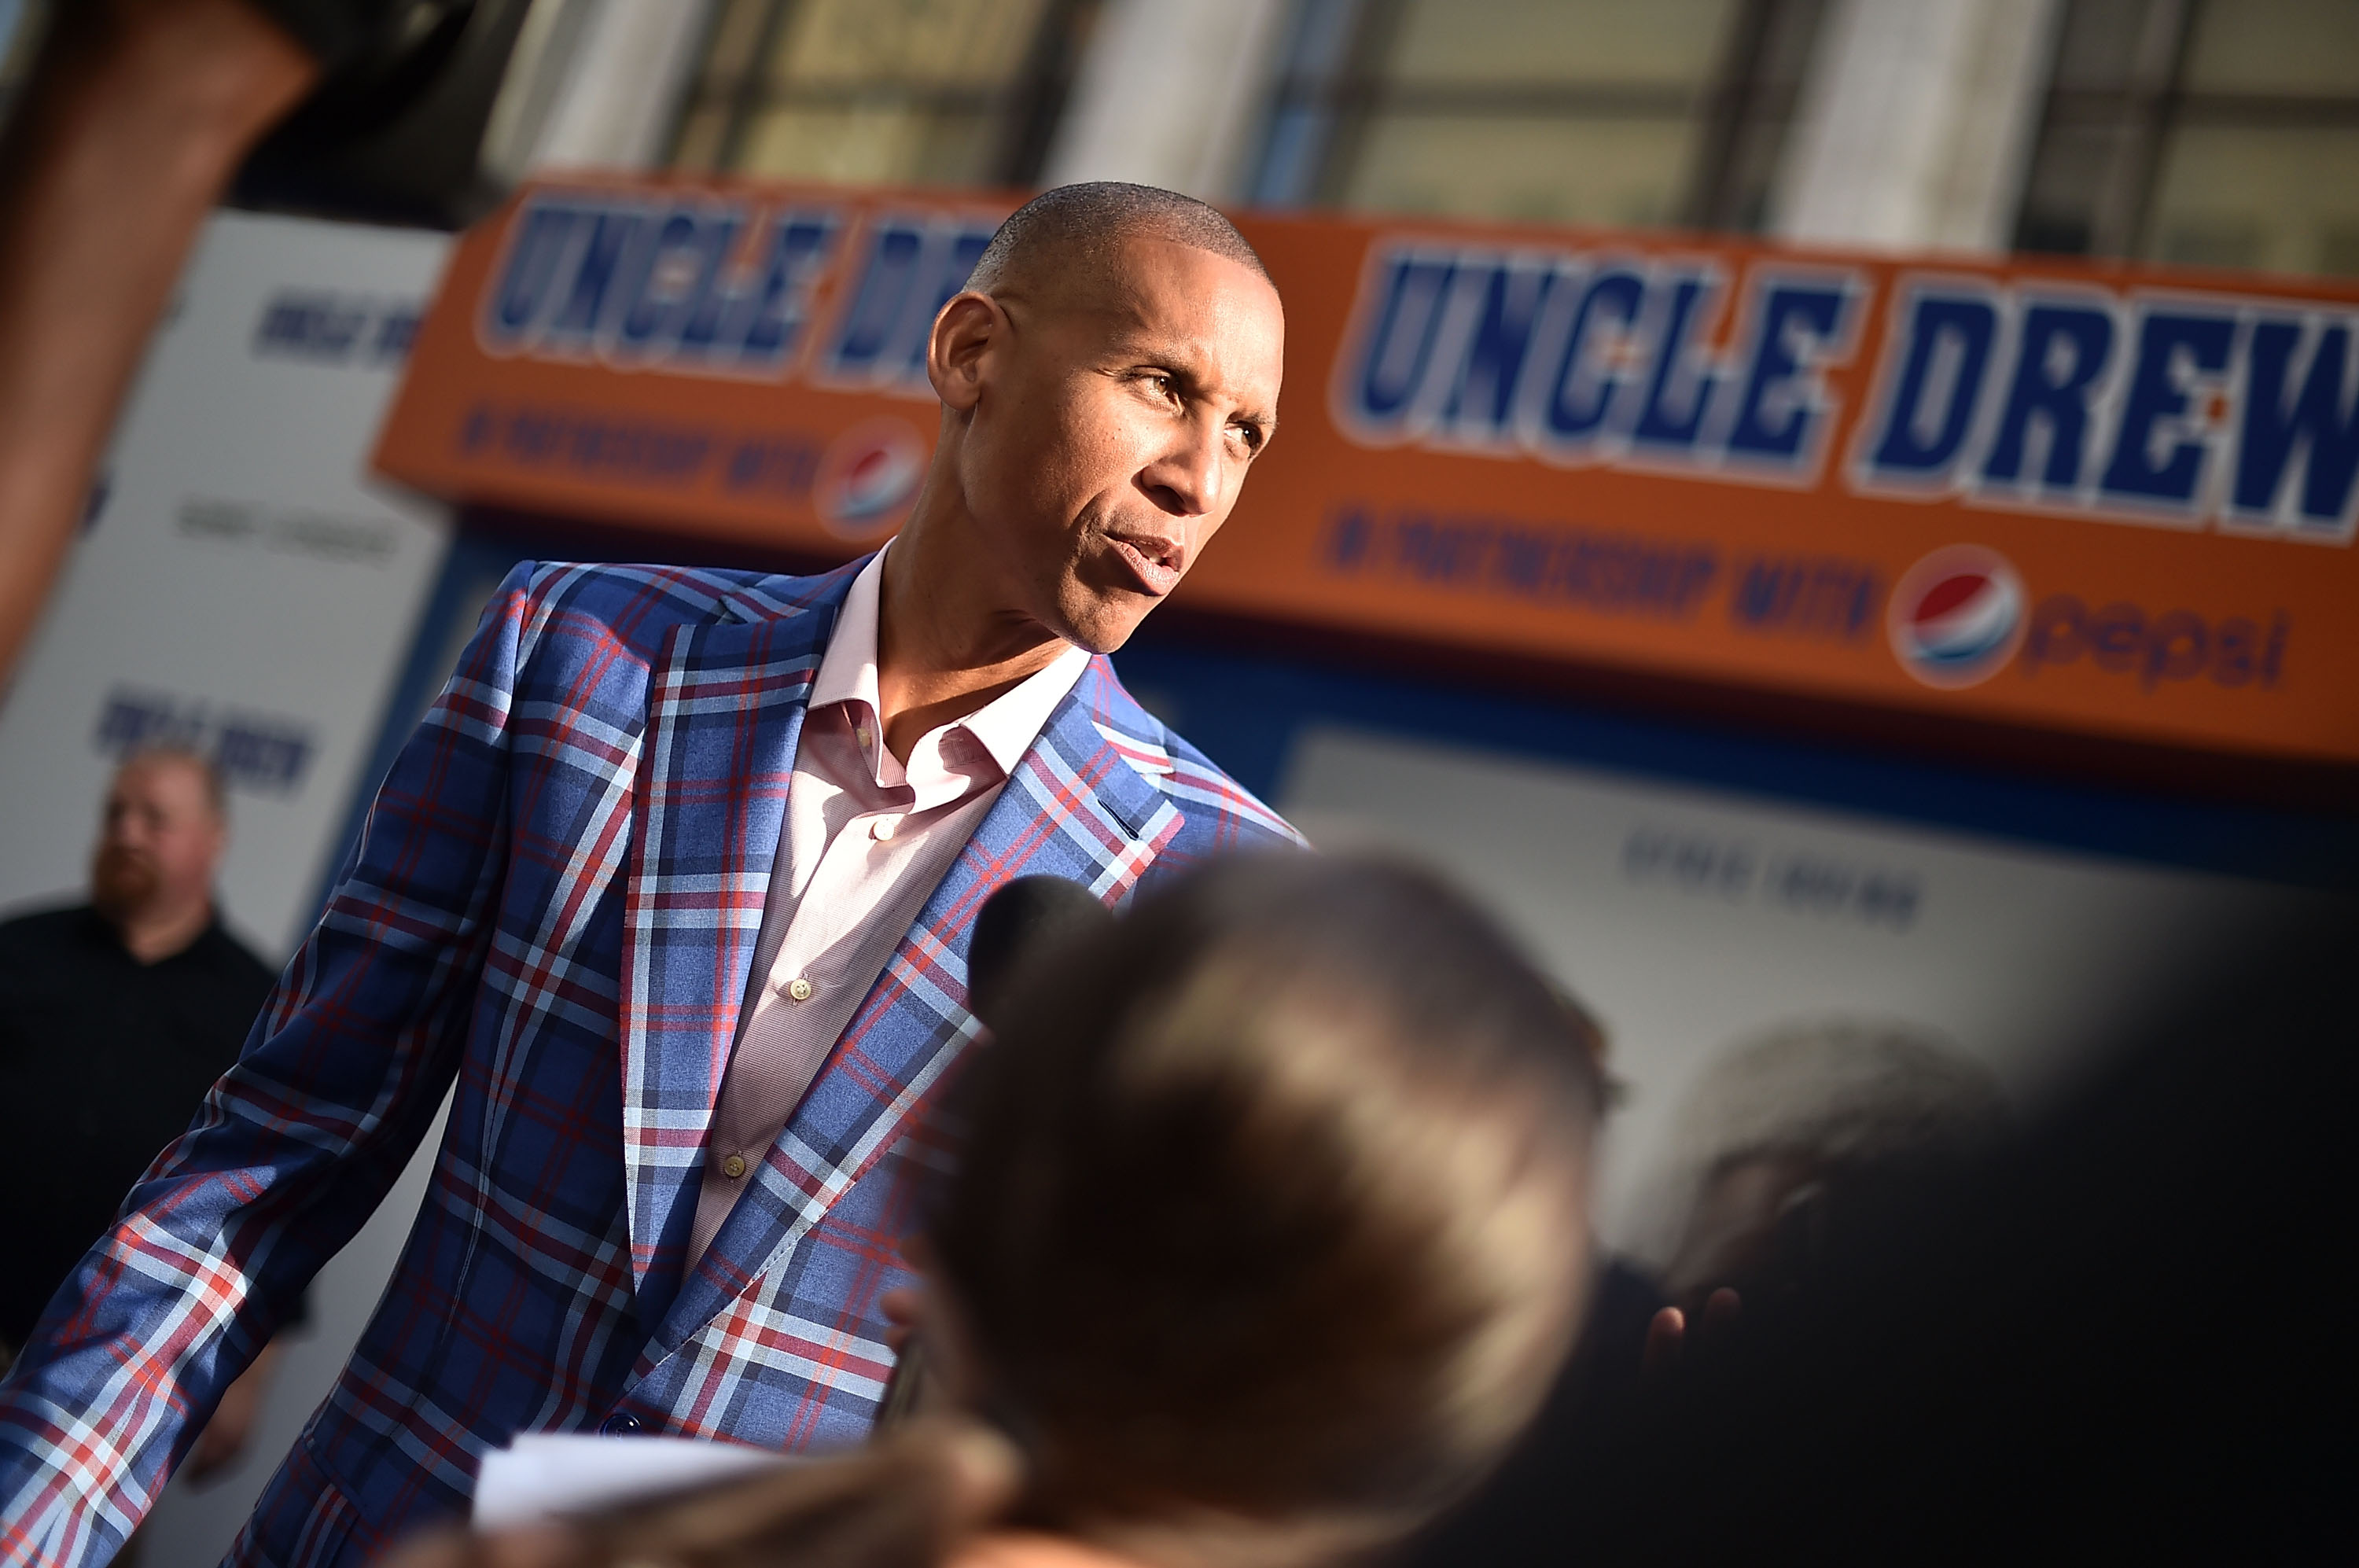 Reggie Miller at the premiere of the "Uncle Drew" movie in 2018